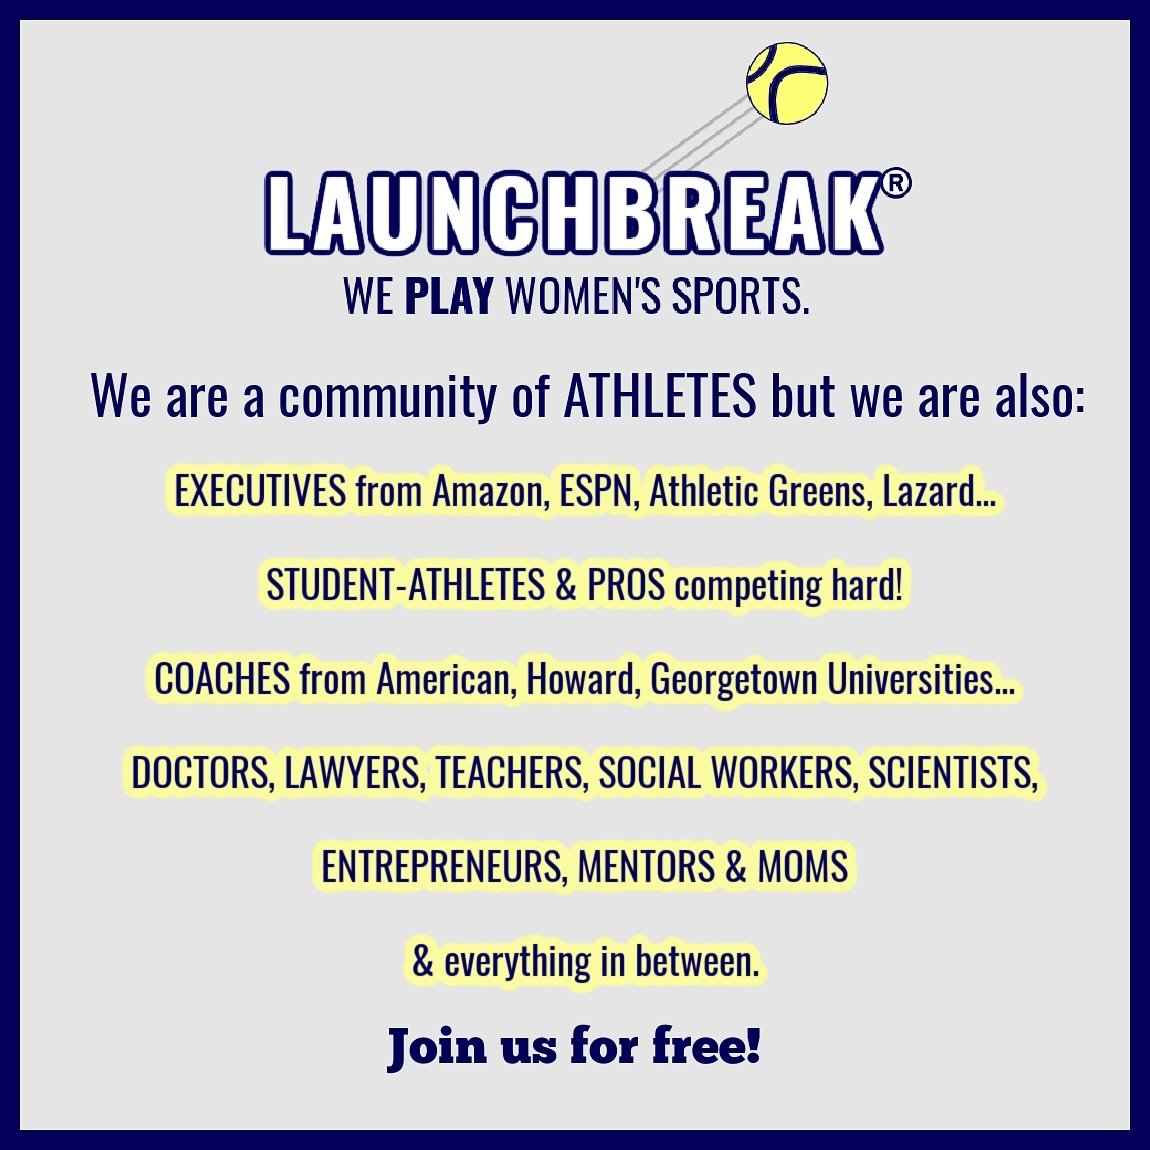 LaunchBreak is a professional and shared-interest networking community for athletes who play/ed women&rsquo;s sports at the collegiate, national, or pro level. Join our inclusive community for free today. Link in profile.

#womensports
#womensupporti